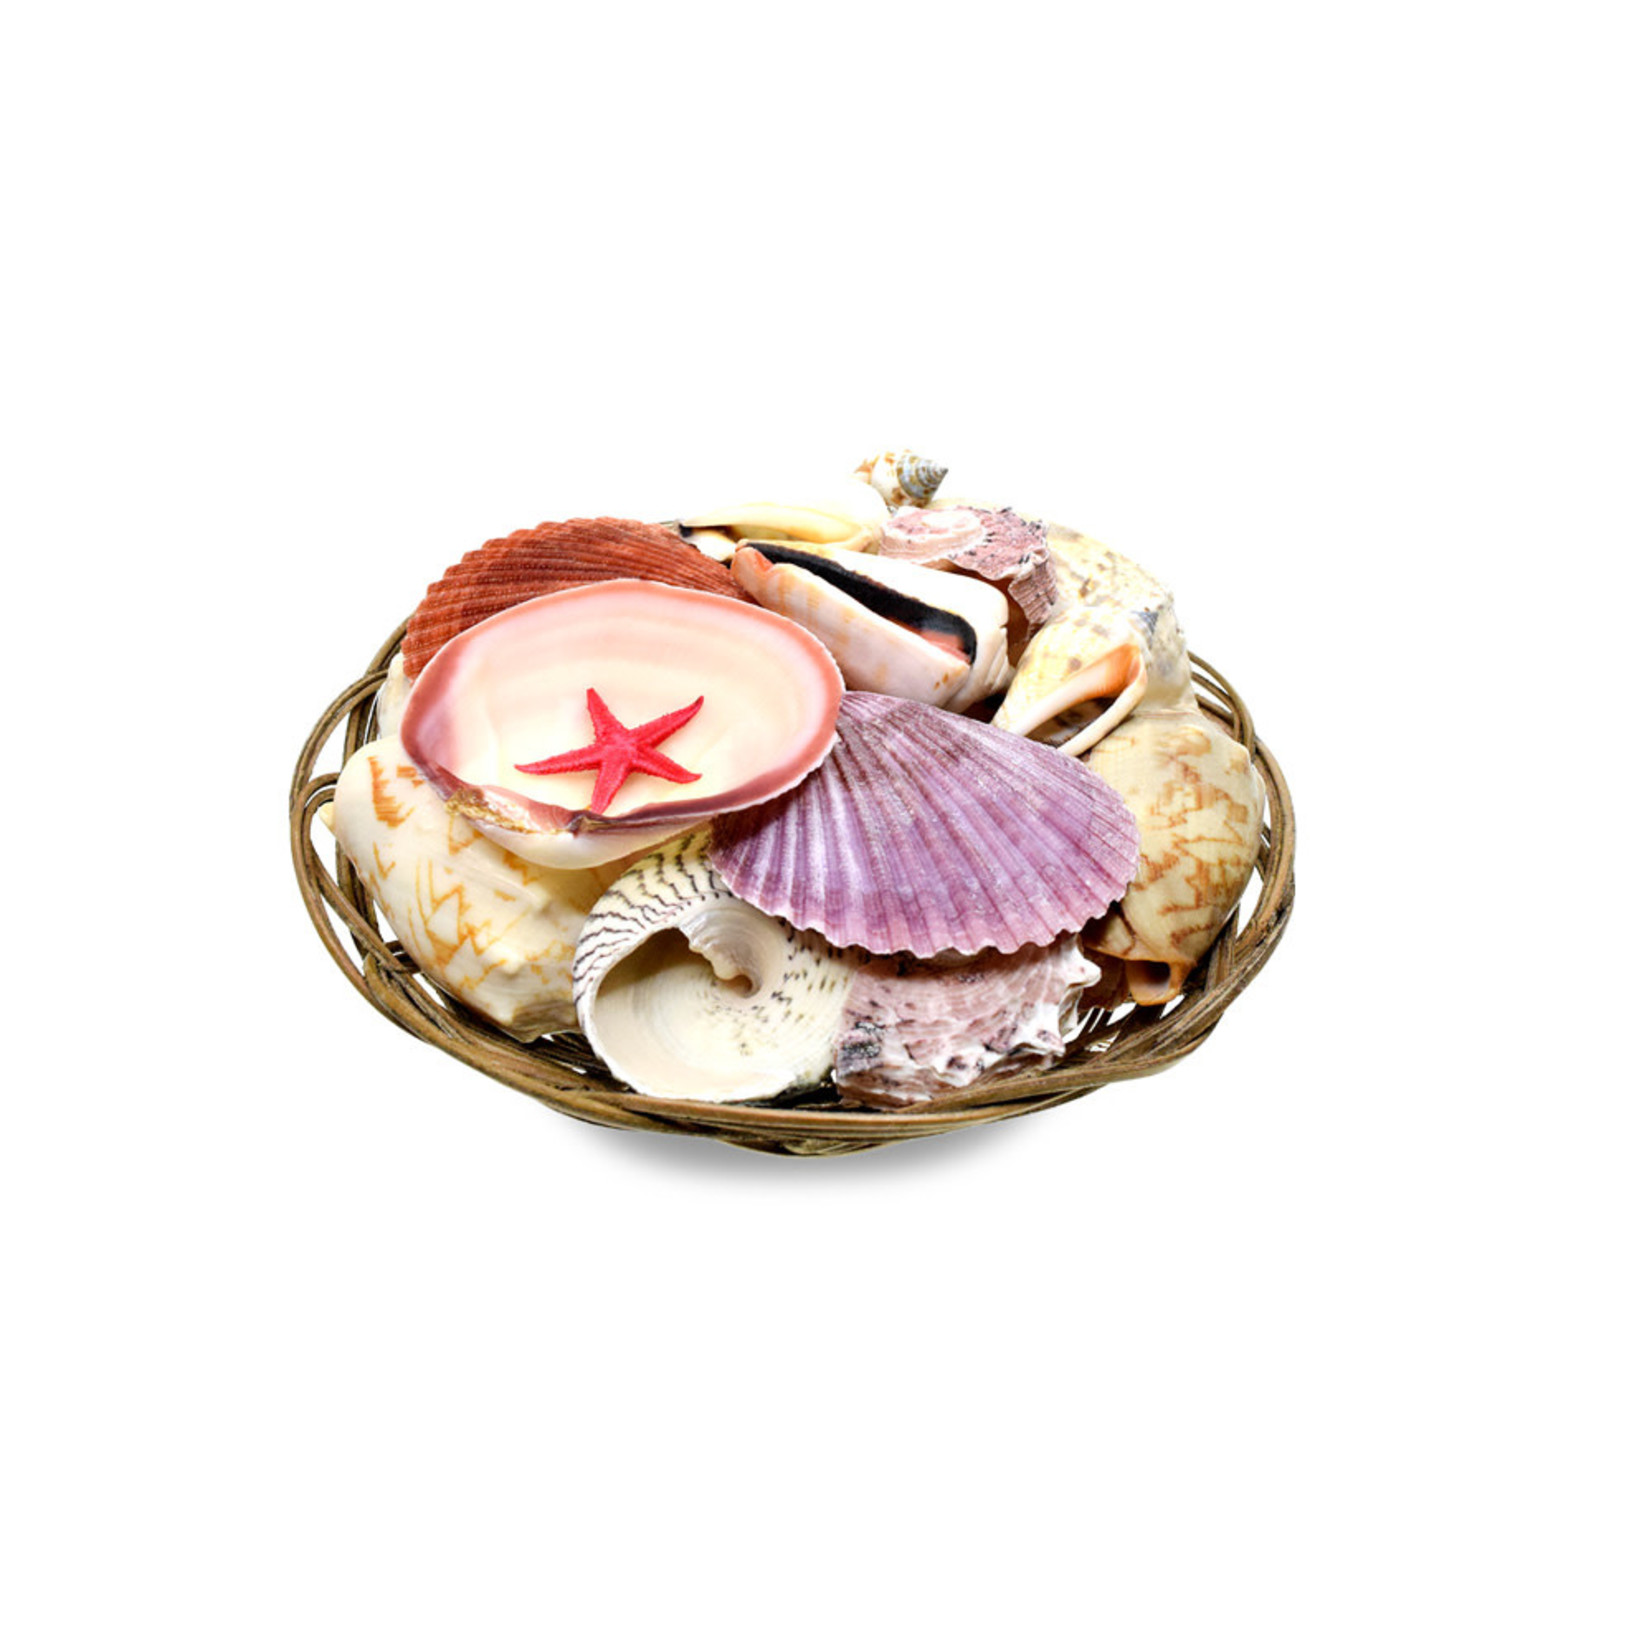 CRAFT DÉCOR: 6IN BASKET ASST SEASHELLS WITH RED BABY STARFISH